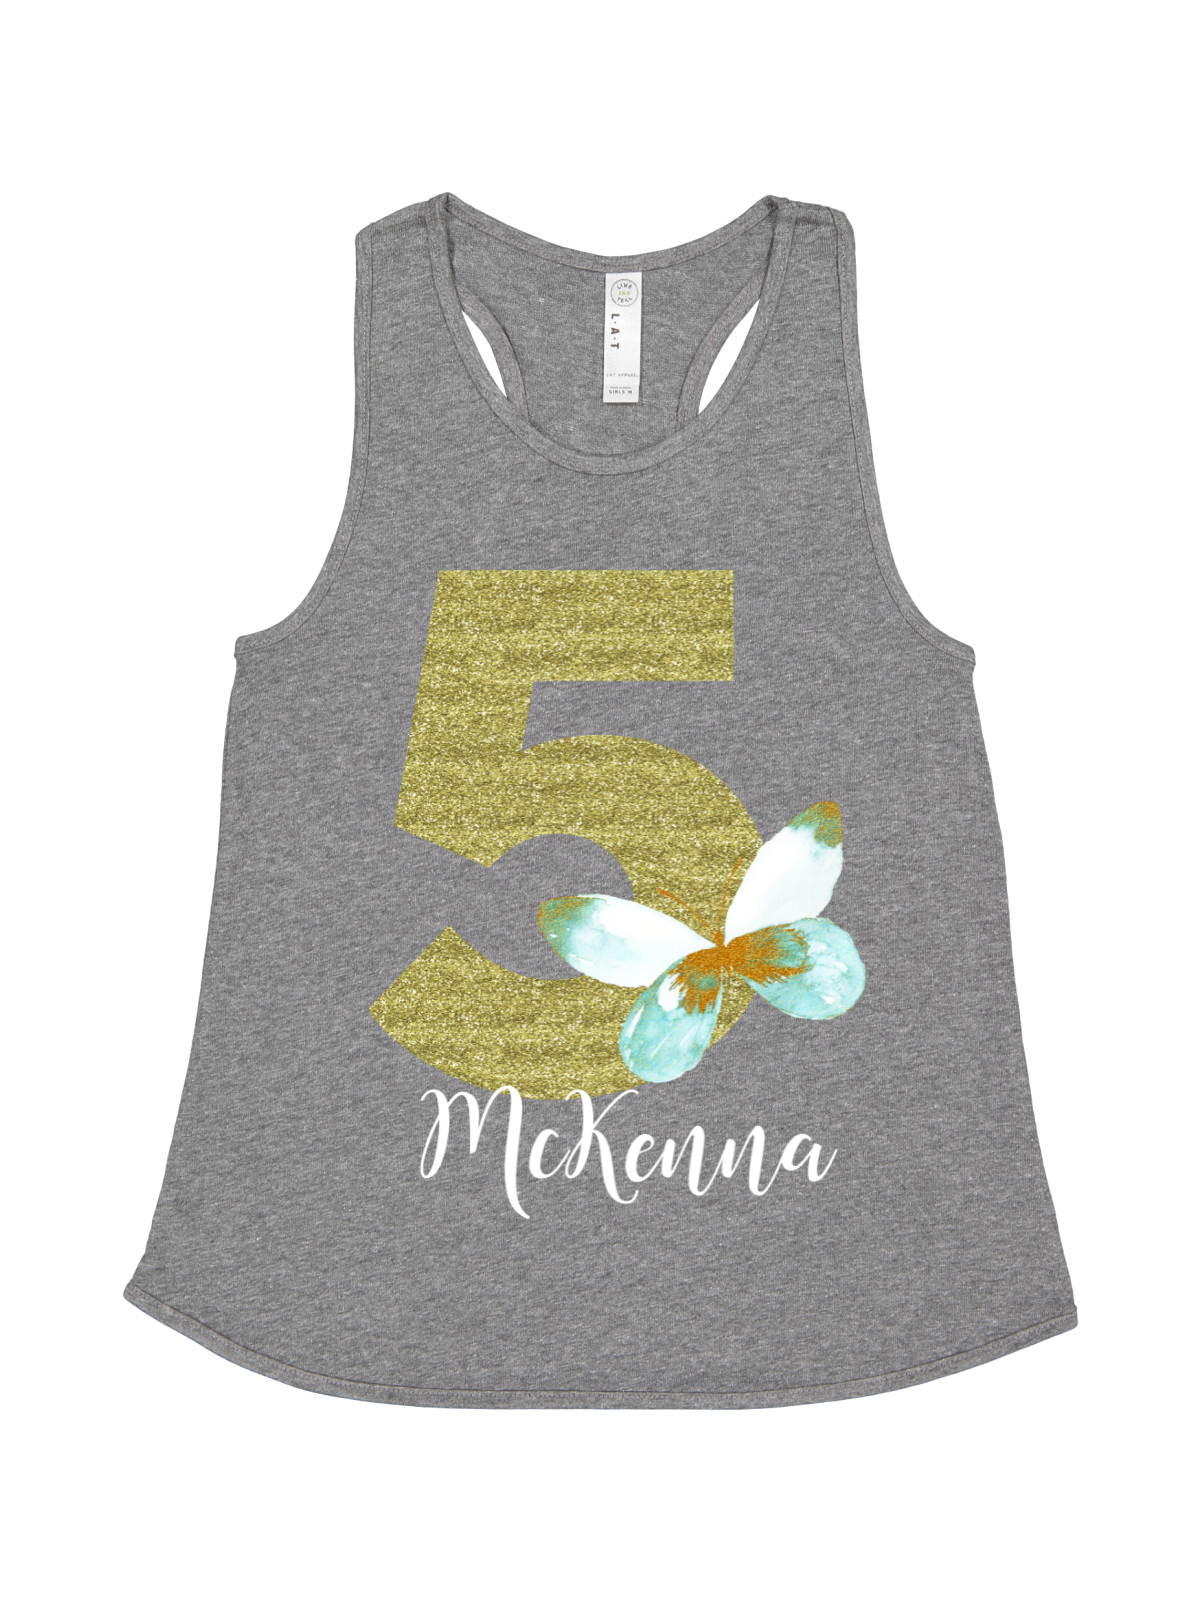 girls personalized tank top butterfly theme